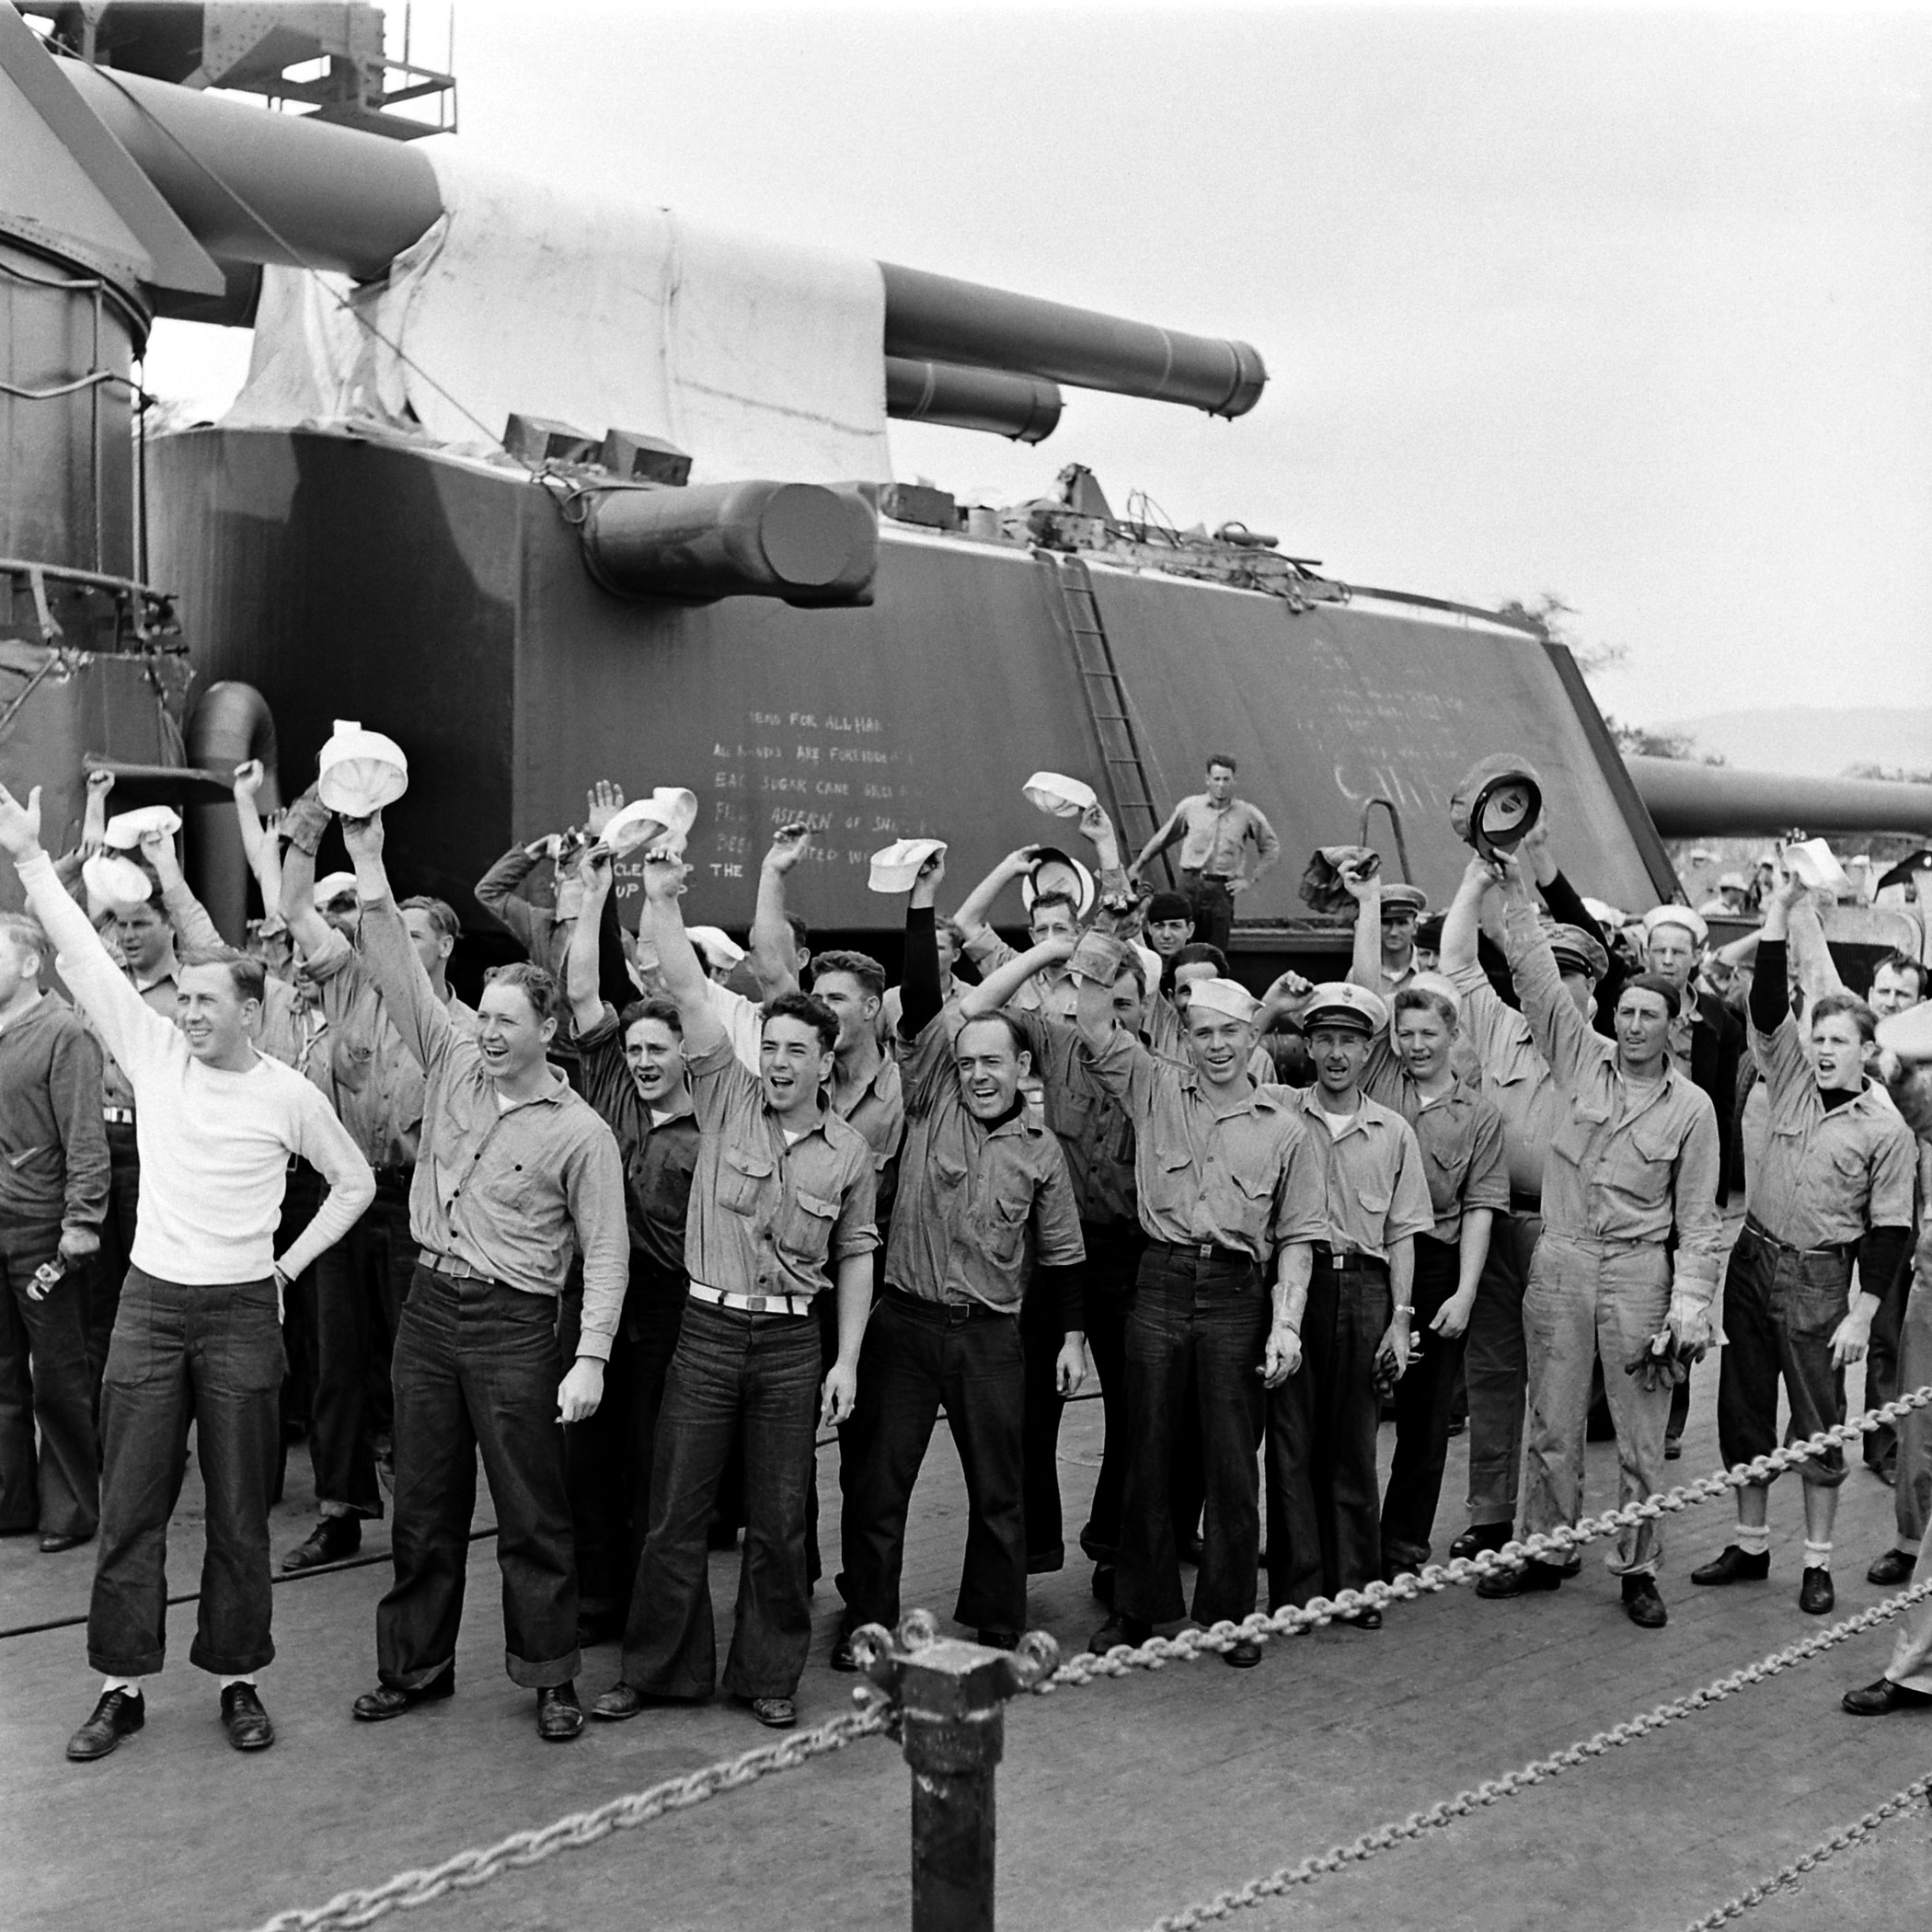 An American warship's crew shows its spirit, Pearl Harbor, early 1942.